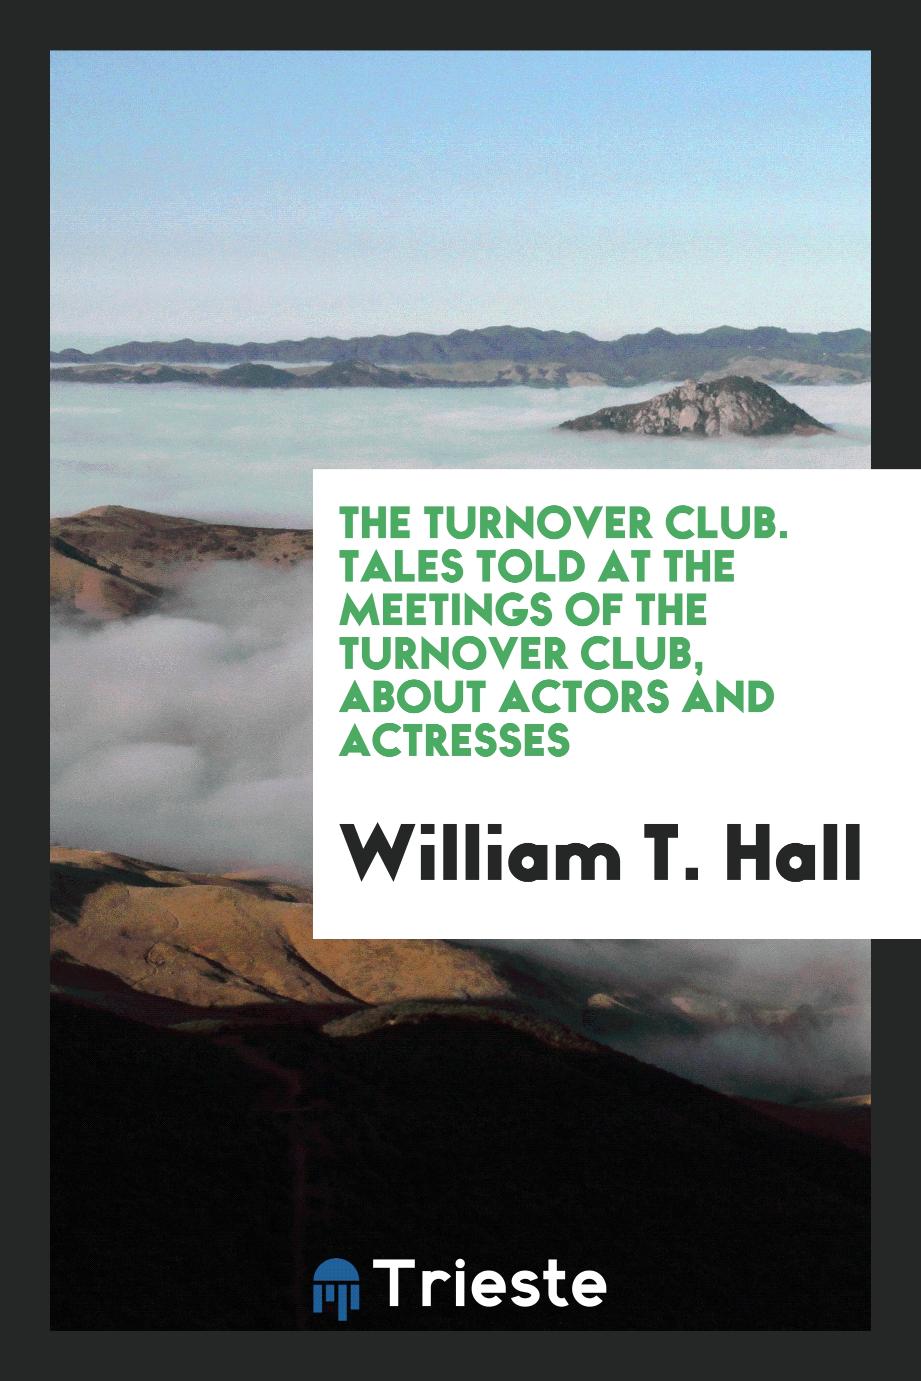 The Turnover club. Tales told at the meetings of the Turnover club, about actors and actresses